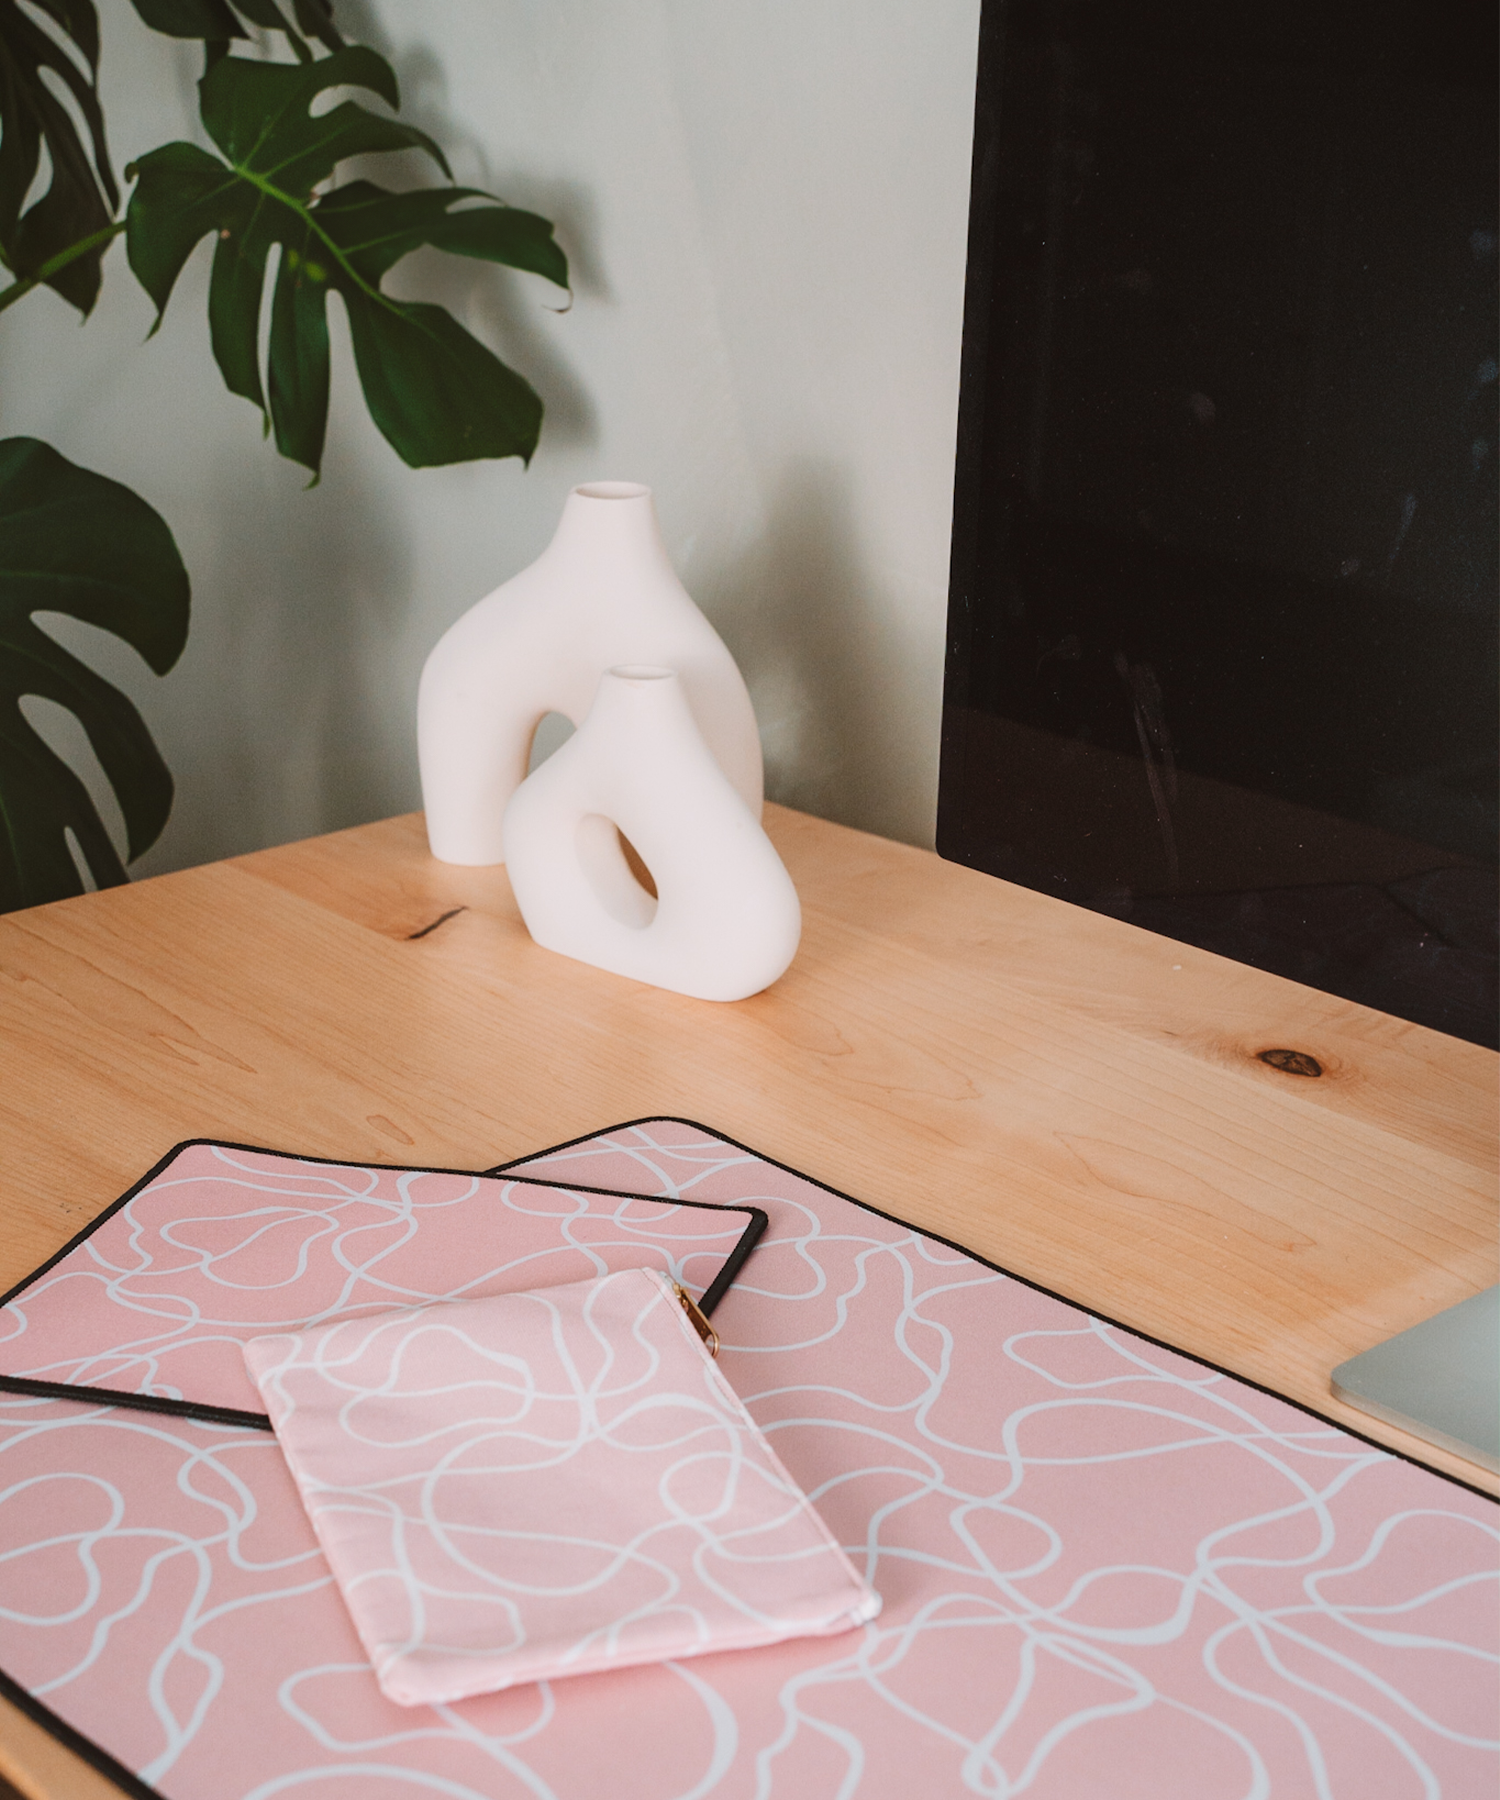 The Terrain mousepad, Terrain accessory pouch, and Terrain desk mat are sitting on a desk with the Apple Studio Display and two asymmetrical vases. In the distance, there is a monstera plant.